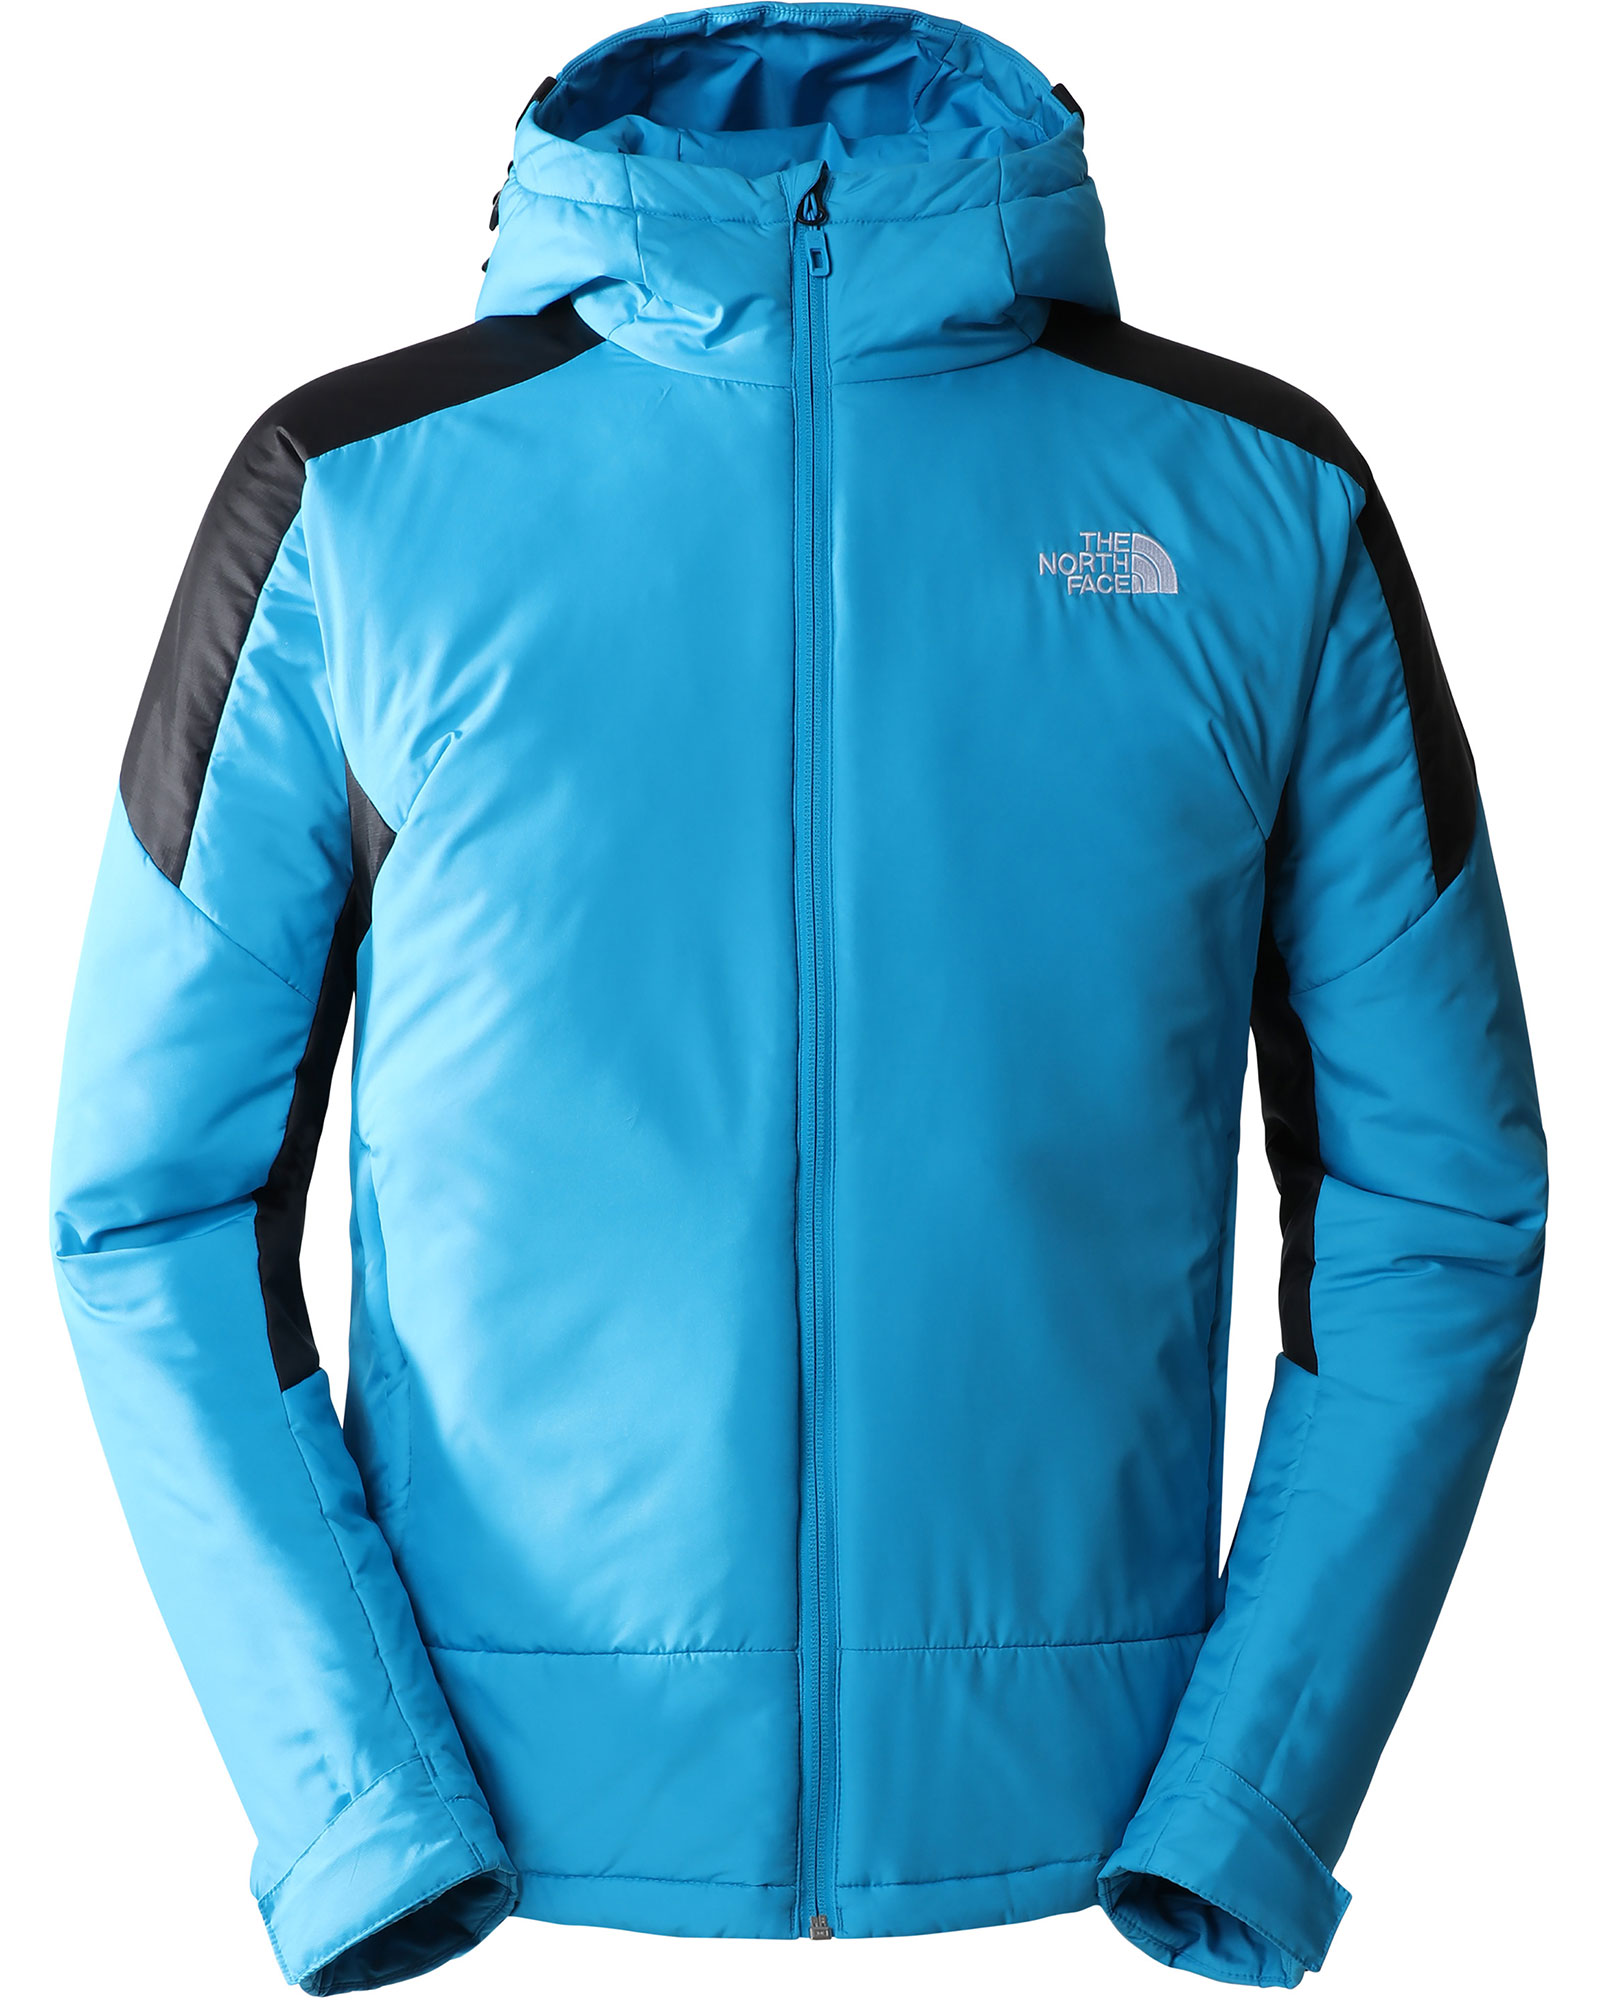 The North Face AO Circular Hybrid Men’s Insulated Jacket - Acoustic Blue S